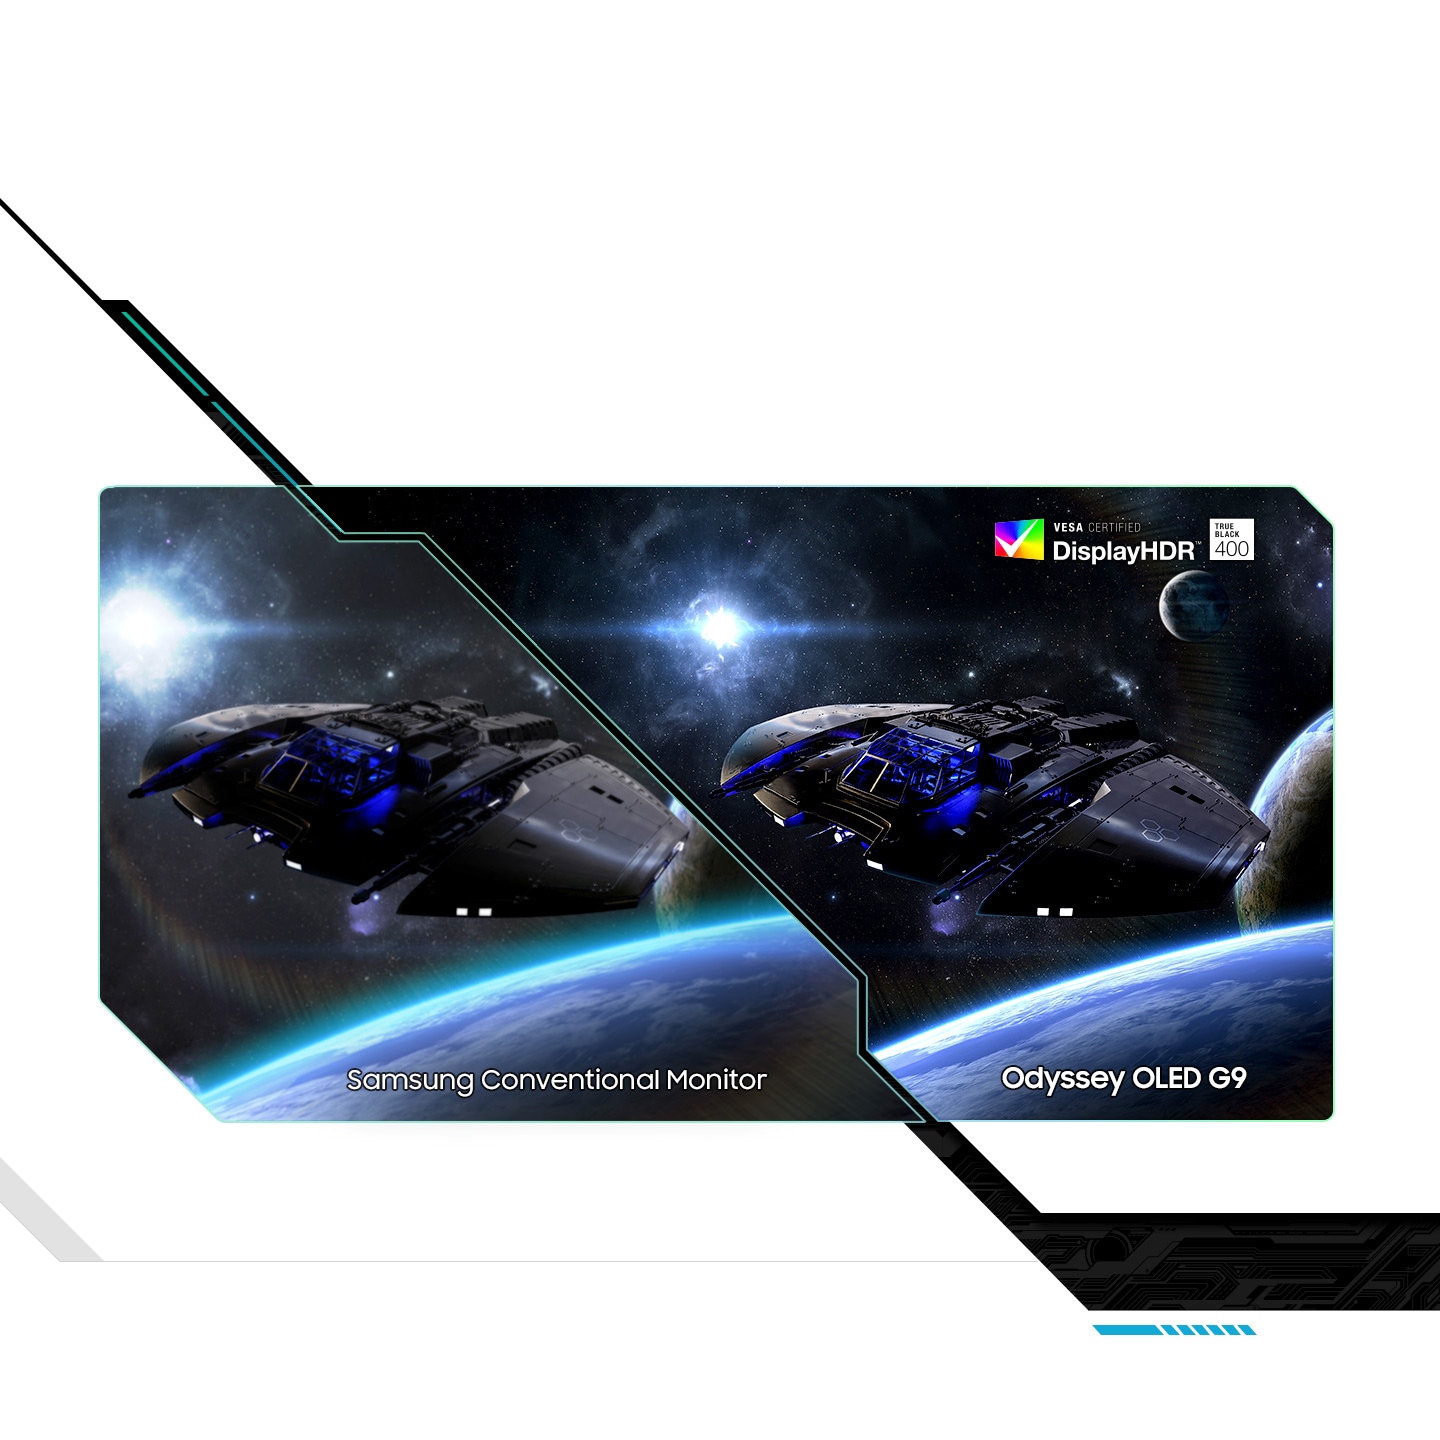 A split screen shows the same spaceship flying away from a planet, a moon and a star. On the left, text reads “Samsung Conventional Monitor” and on the right, “Odyssey OLED G9.” Text on the right side reads “VESA Certified Display HDR True Black 400.” The right side shows deeper blacks and brighter whites with details.